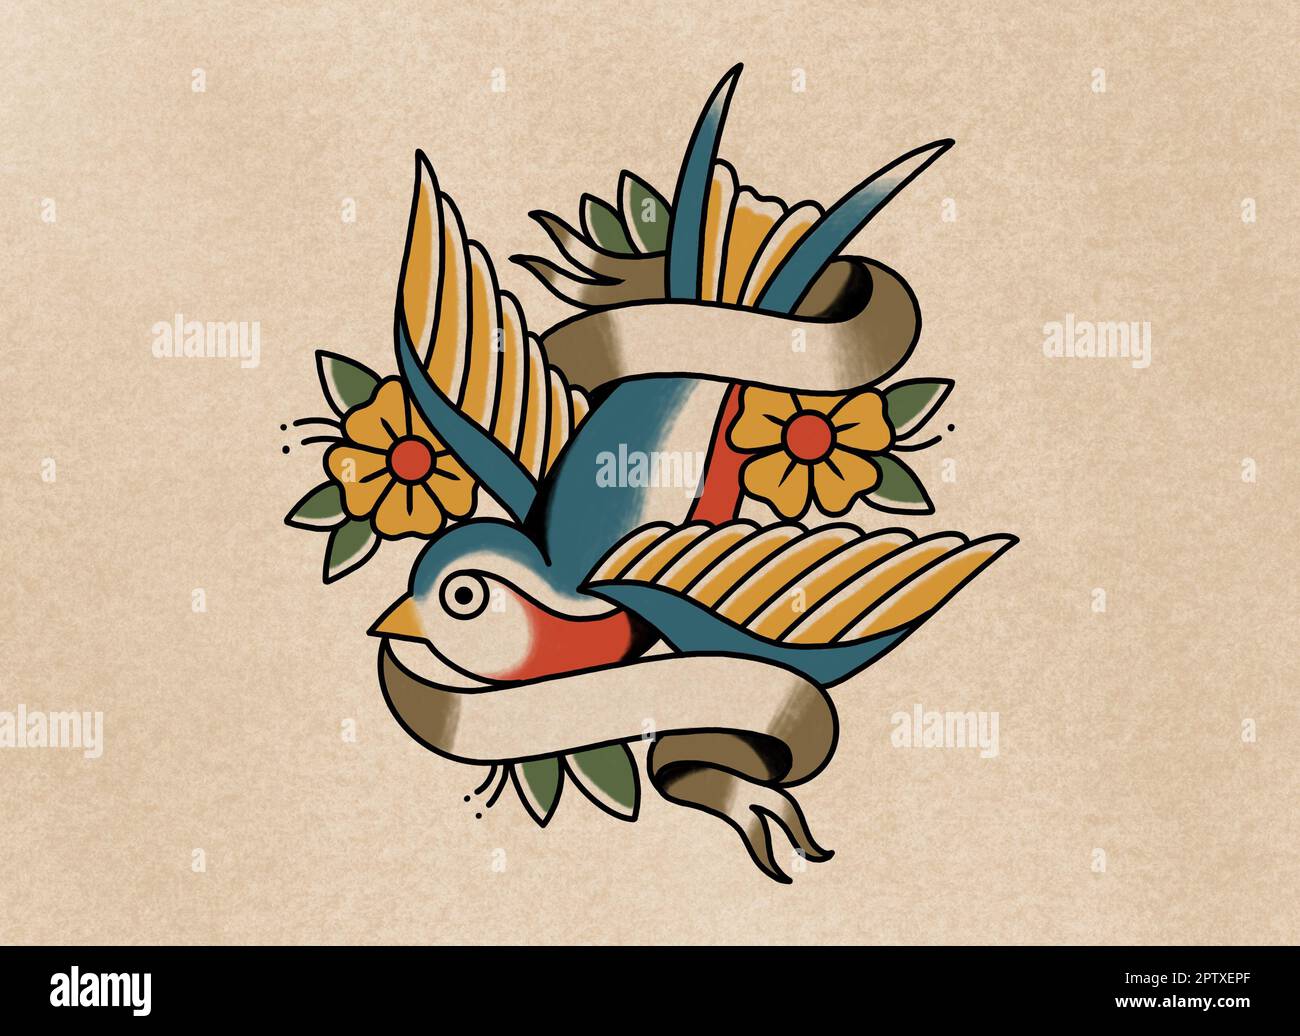 Old school tattoo art style drawing bird holding paper scroll in beak with flowers Stock Photo